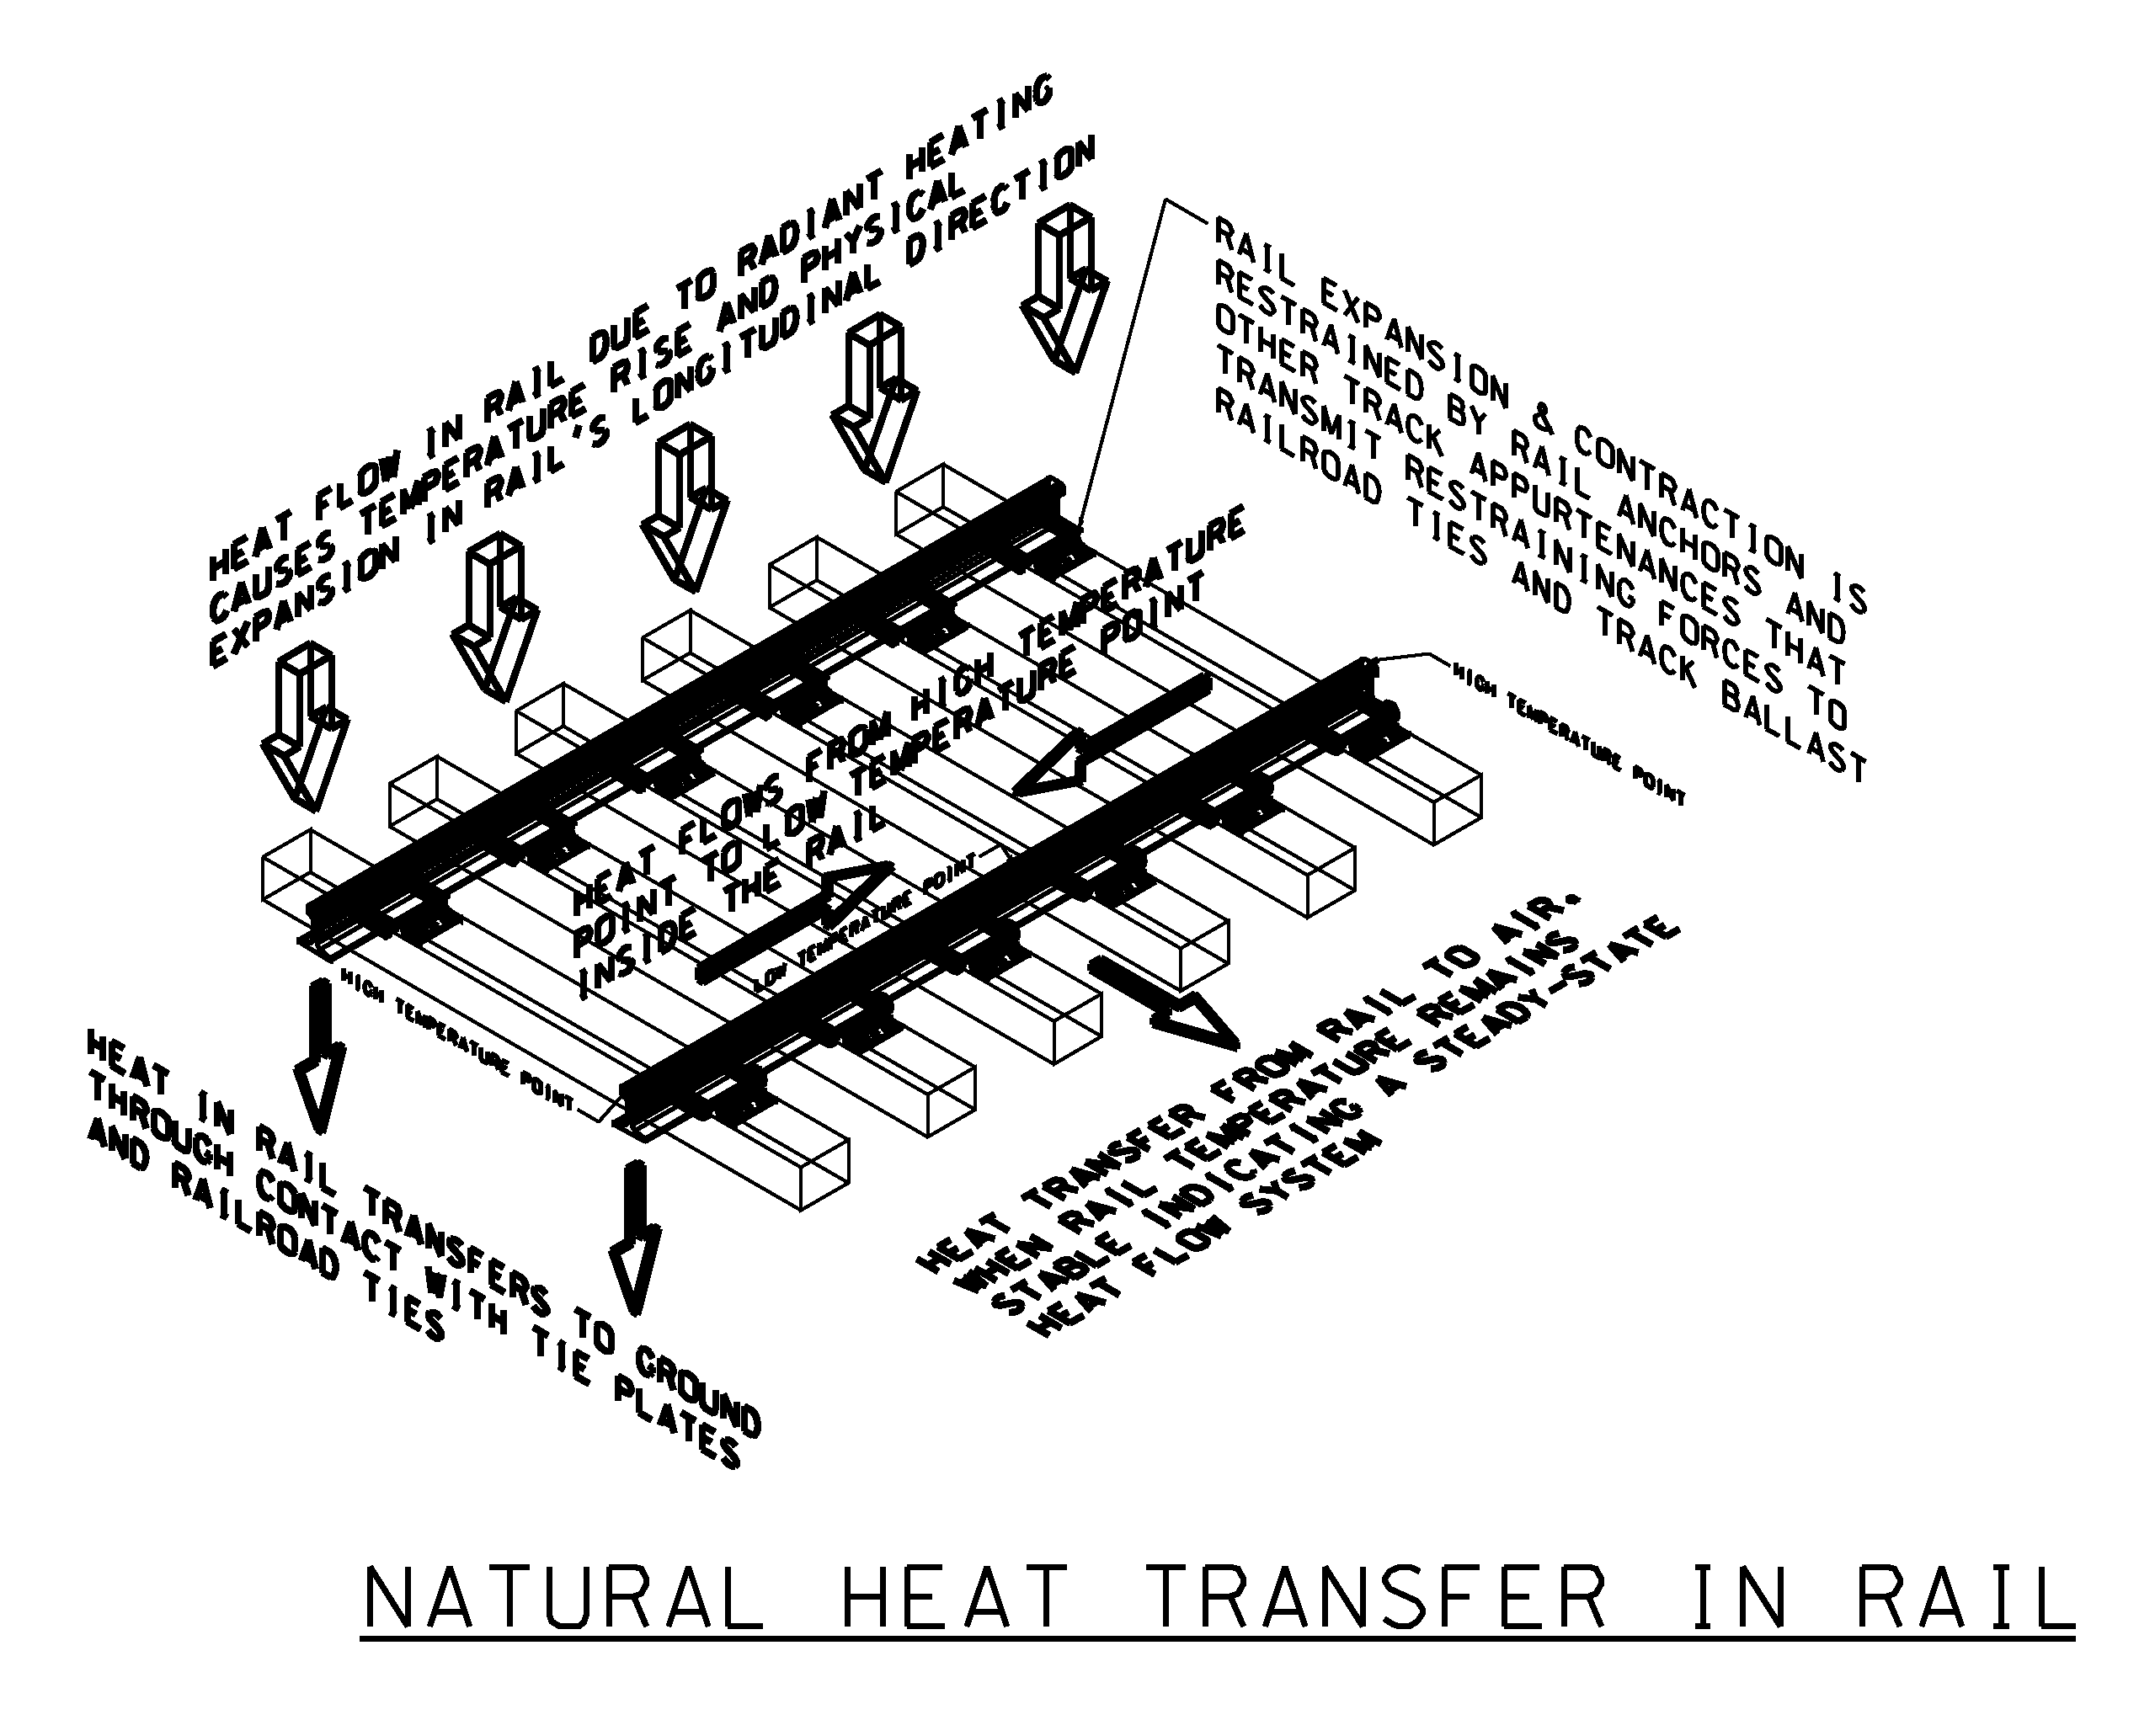 Geothermal Rail Cooling and Heating System